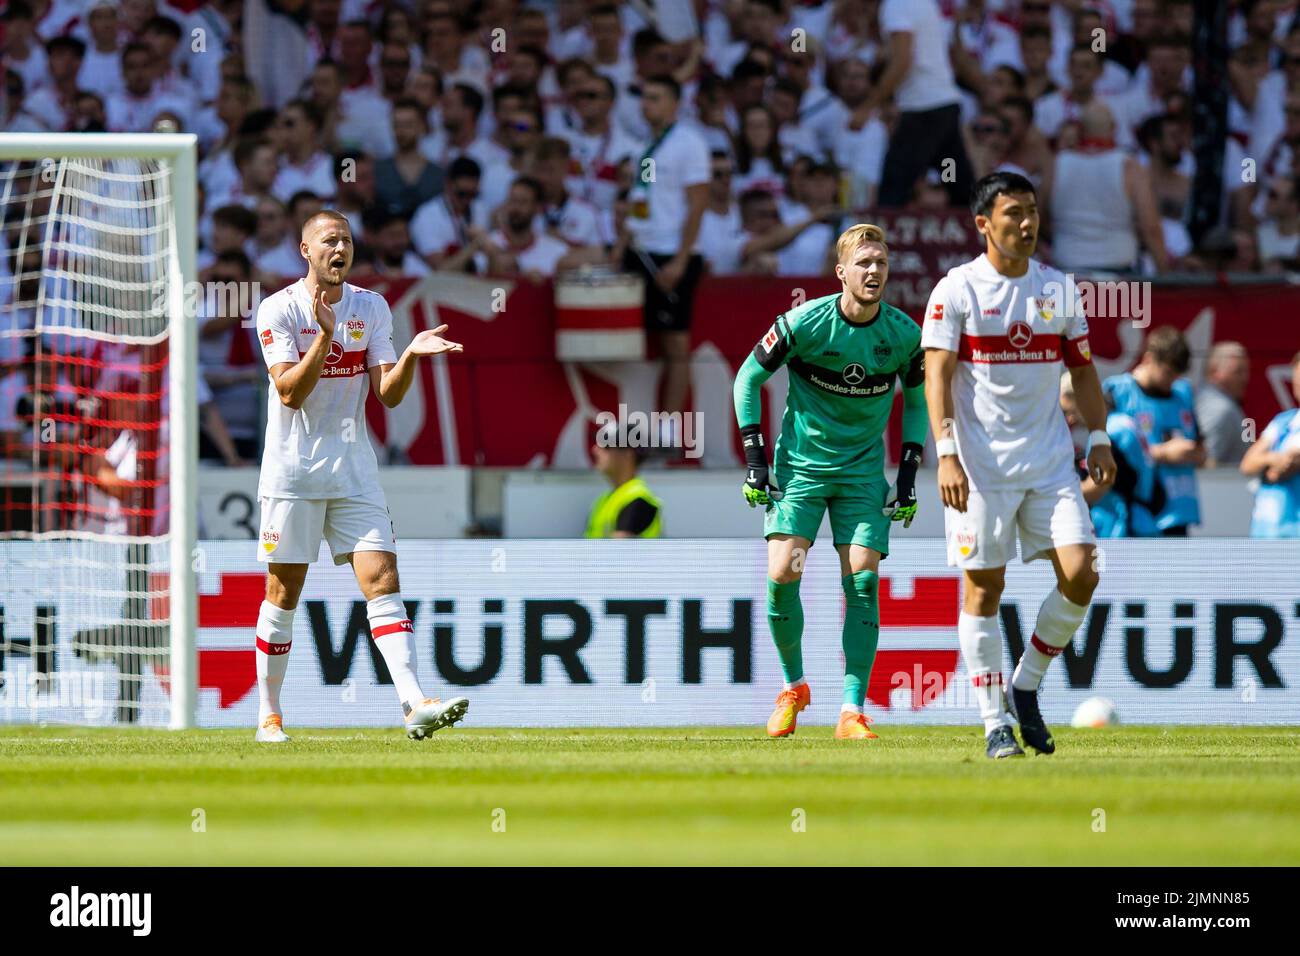 07 August 2022, Baden-Wuerttemberg, Stuttgart: Soccer: Bundesliga, VfB Stuttgart - RB Leipzig, Matchday 1, Mercedes-Benz Arena. Stuttgart's Waldemar Anton (l-r), Stuttgart's goalkeeper Florian Müller and Stuttgart's Wataru Endo react during the match. Photo: Tom Weller/dpa - IMPORTANT NOTE: In accordance with the requirements of the DFL Deutsche Fußball Liga and the DFB Deutscher Fußball-Bund, it is prohibited to use or have used photographs taken in the stadium and/or of the match in the form of sequence pictures and/or video-like photo series. Stock Photo